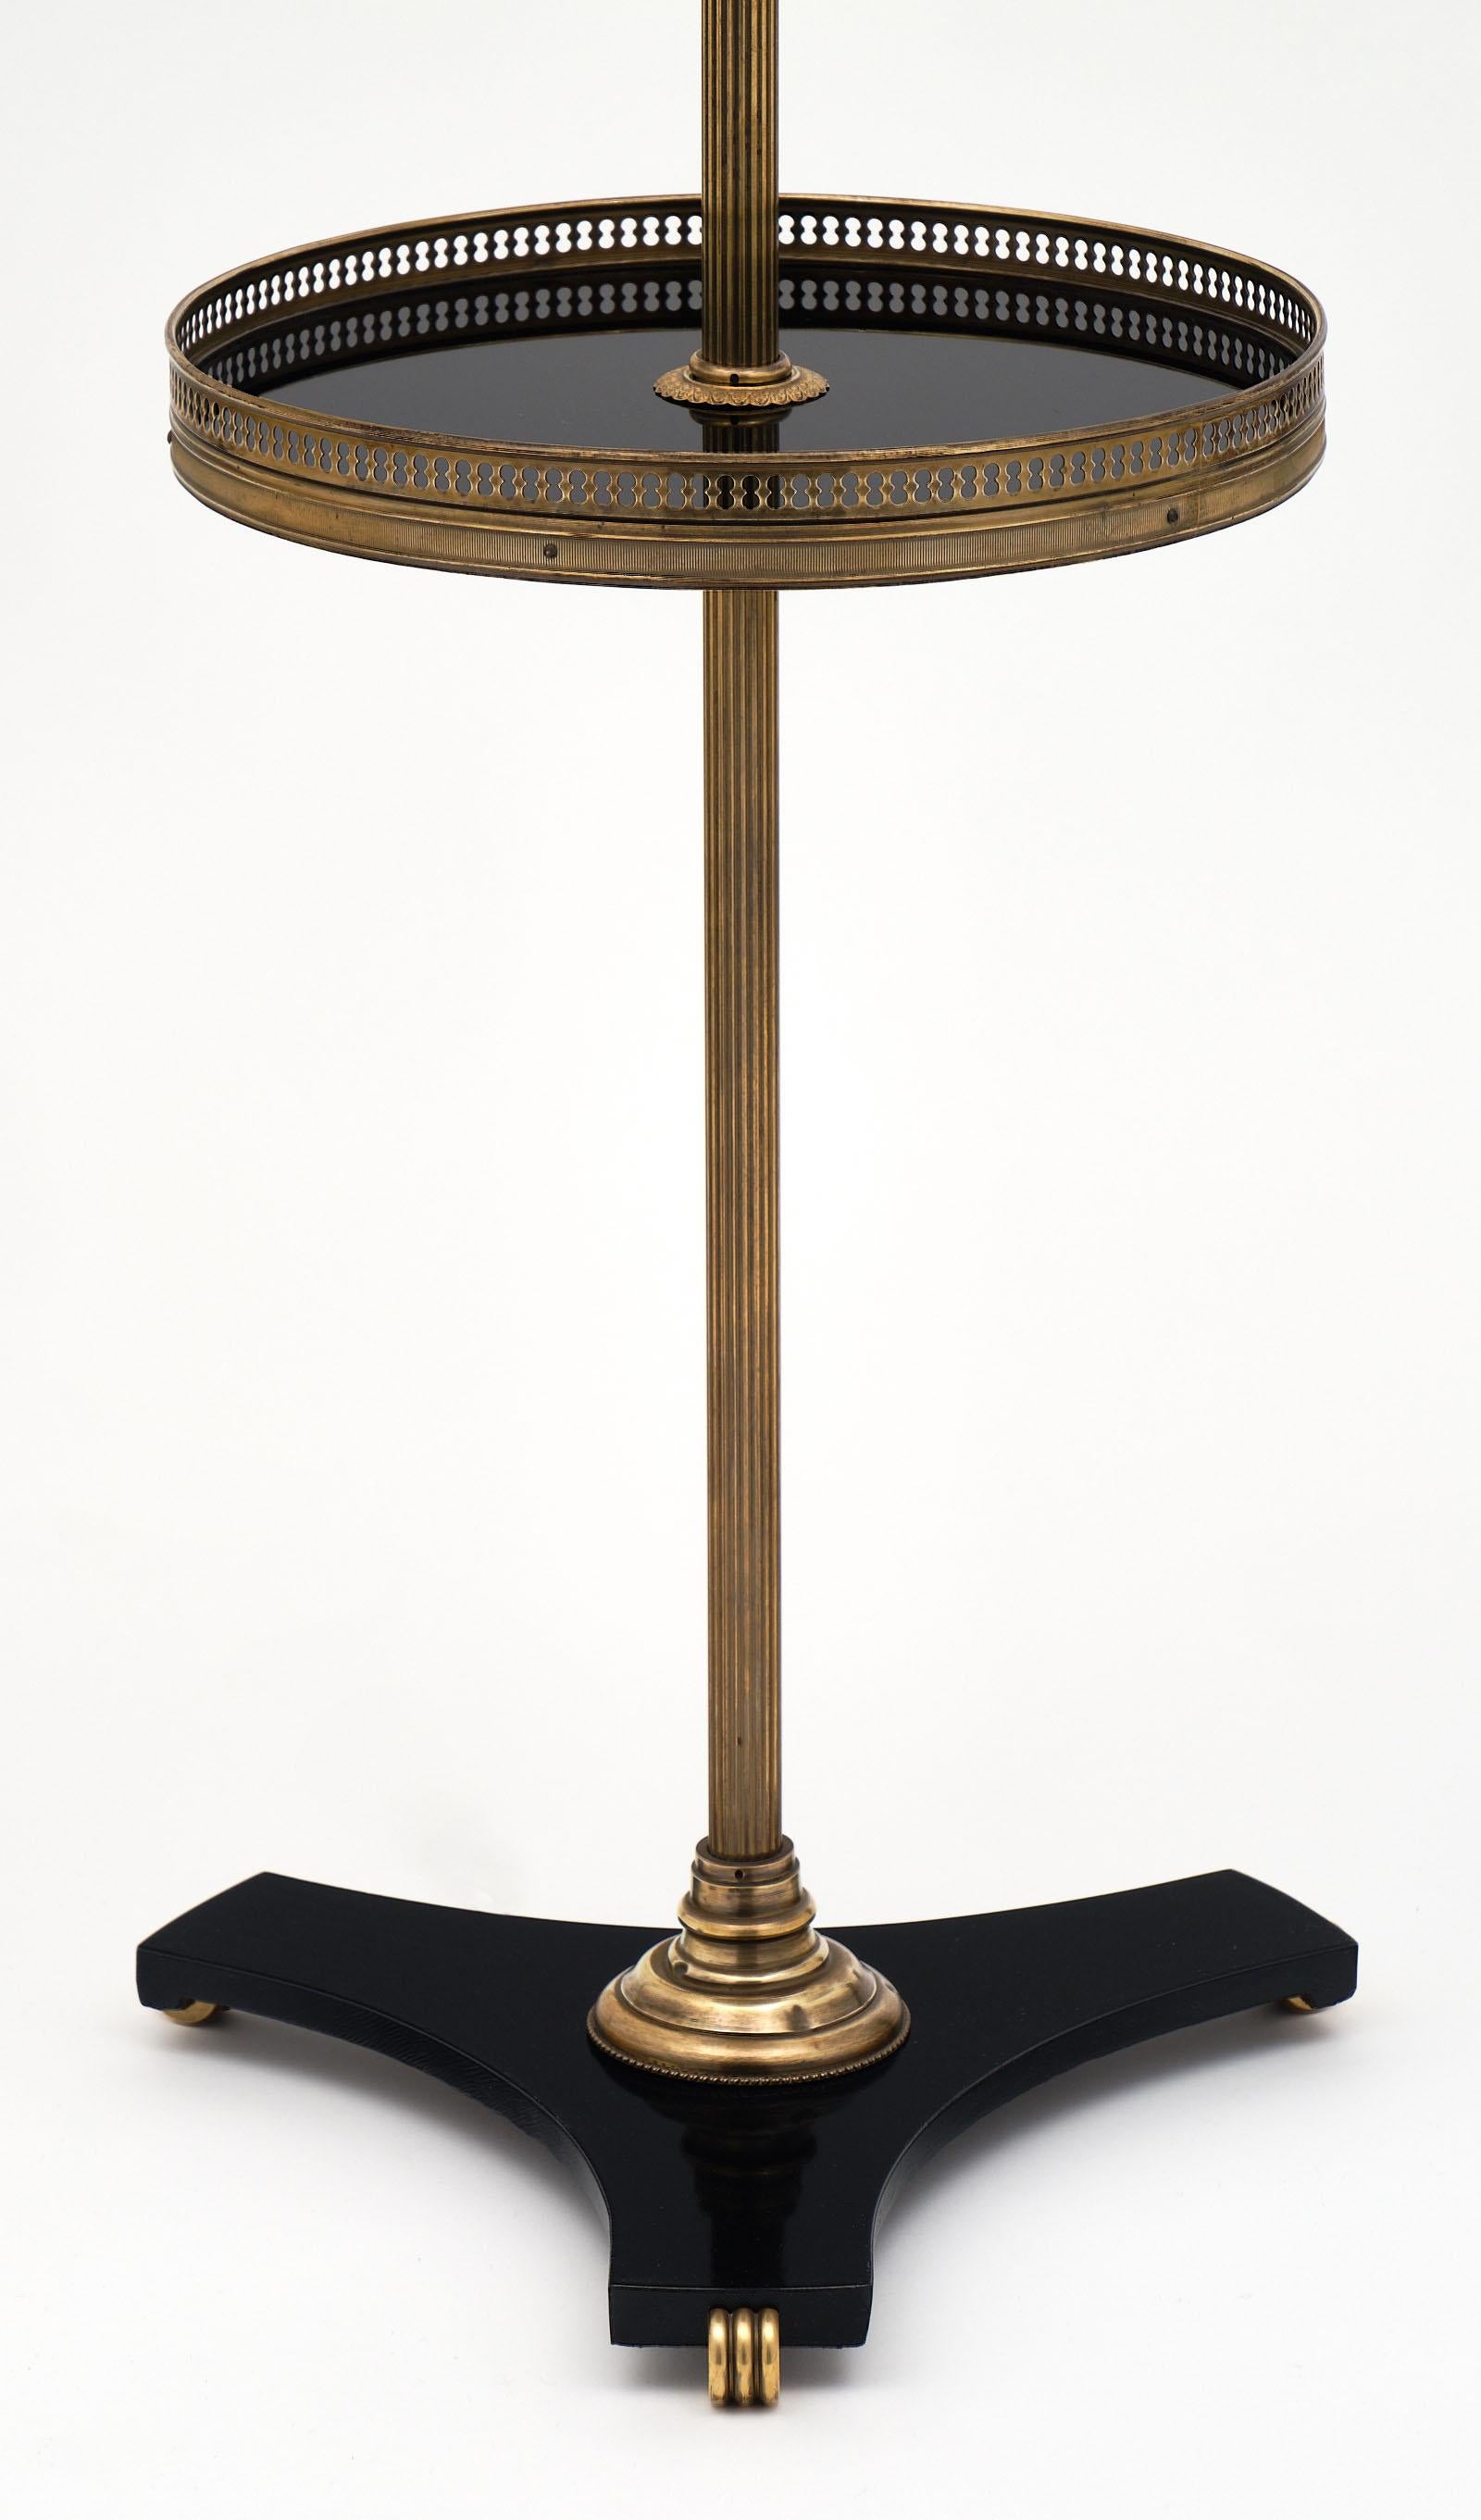 Mid-20th Century Neoclassical French Iron and Brass Floor Lamp